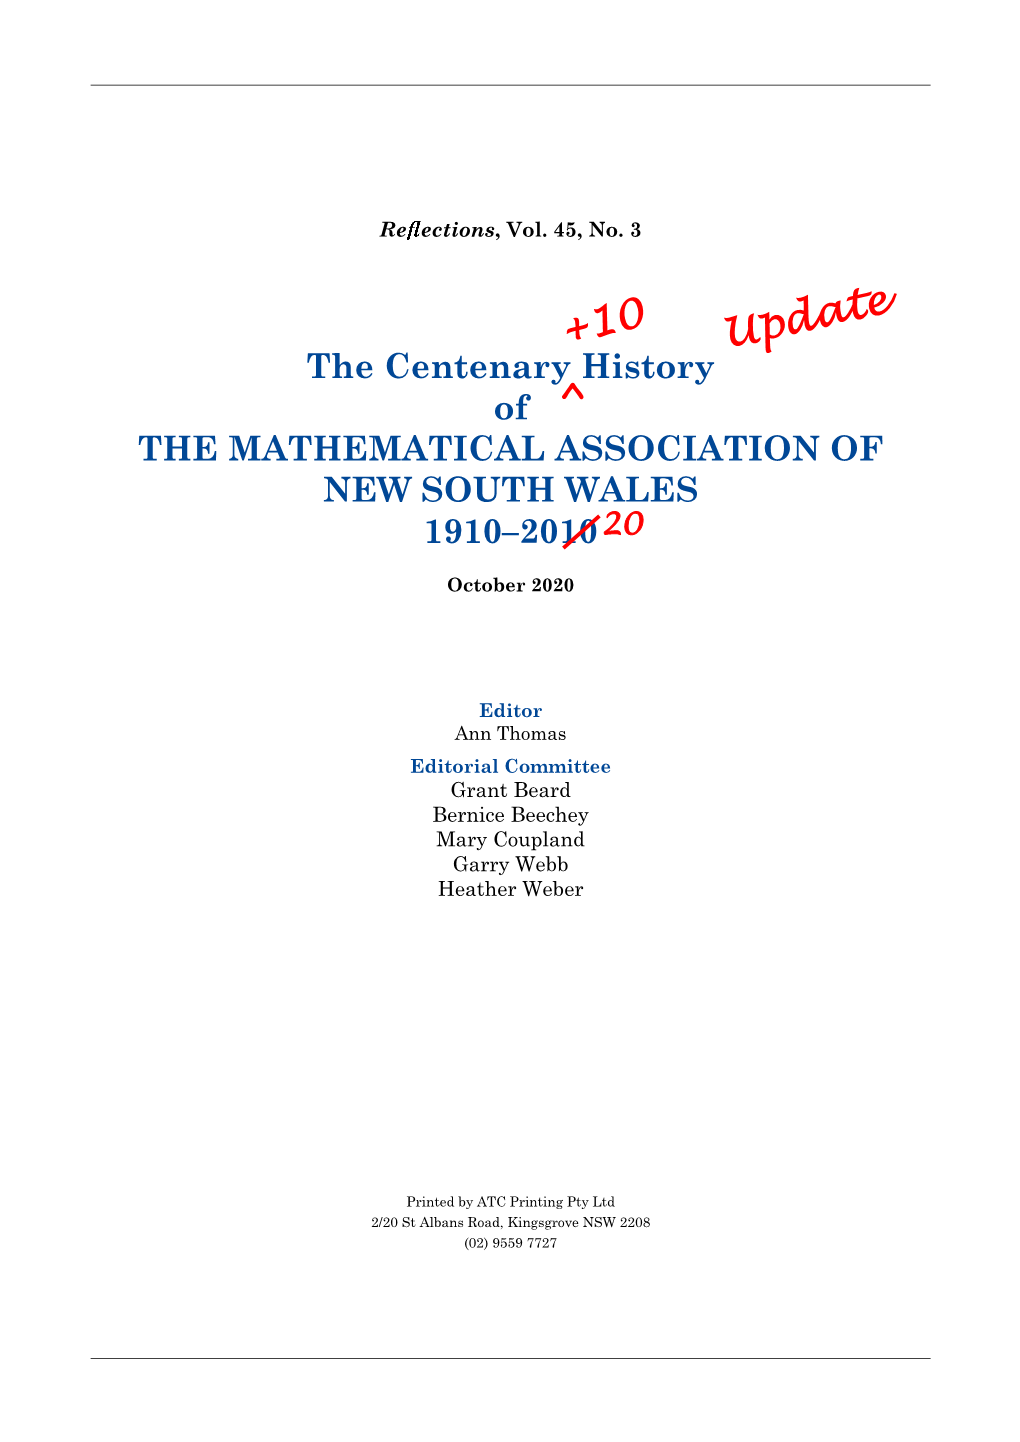 The Centenary History of the Mathematical Association of New South Wales, Written by Graeme L